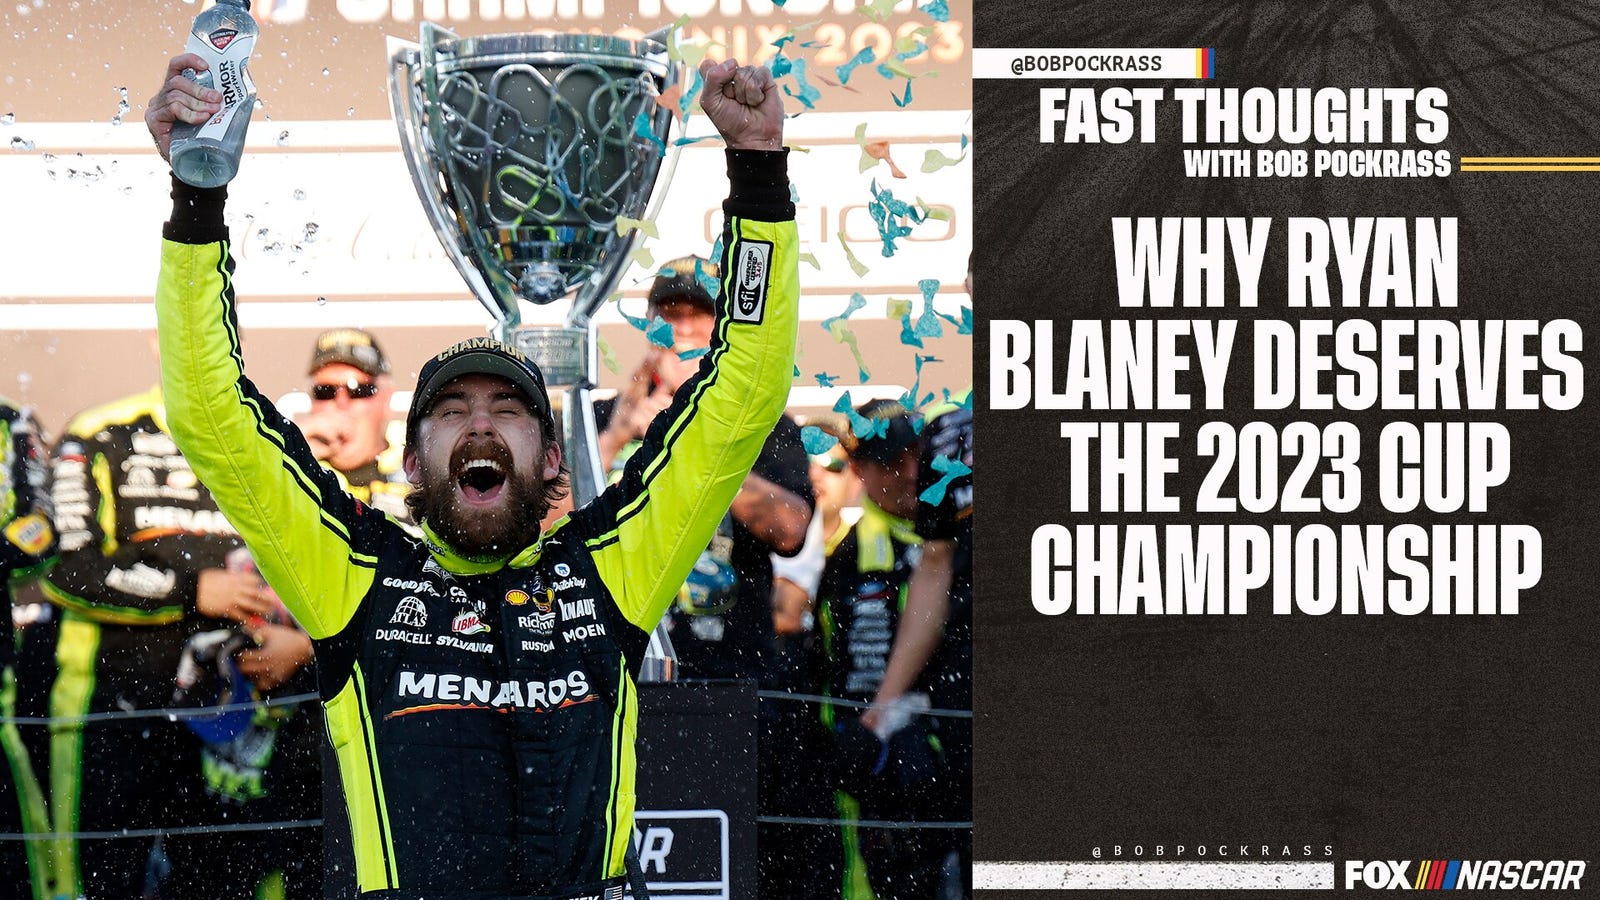 Why Ryan Blaney deserves the 2023 Cup Championship